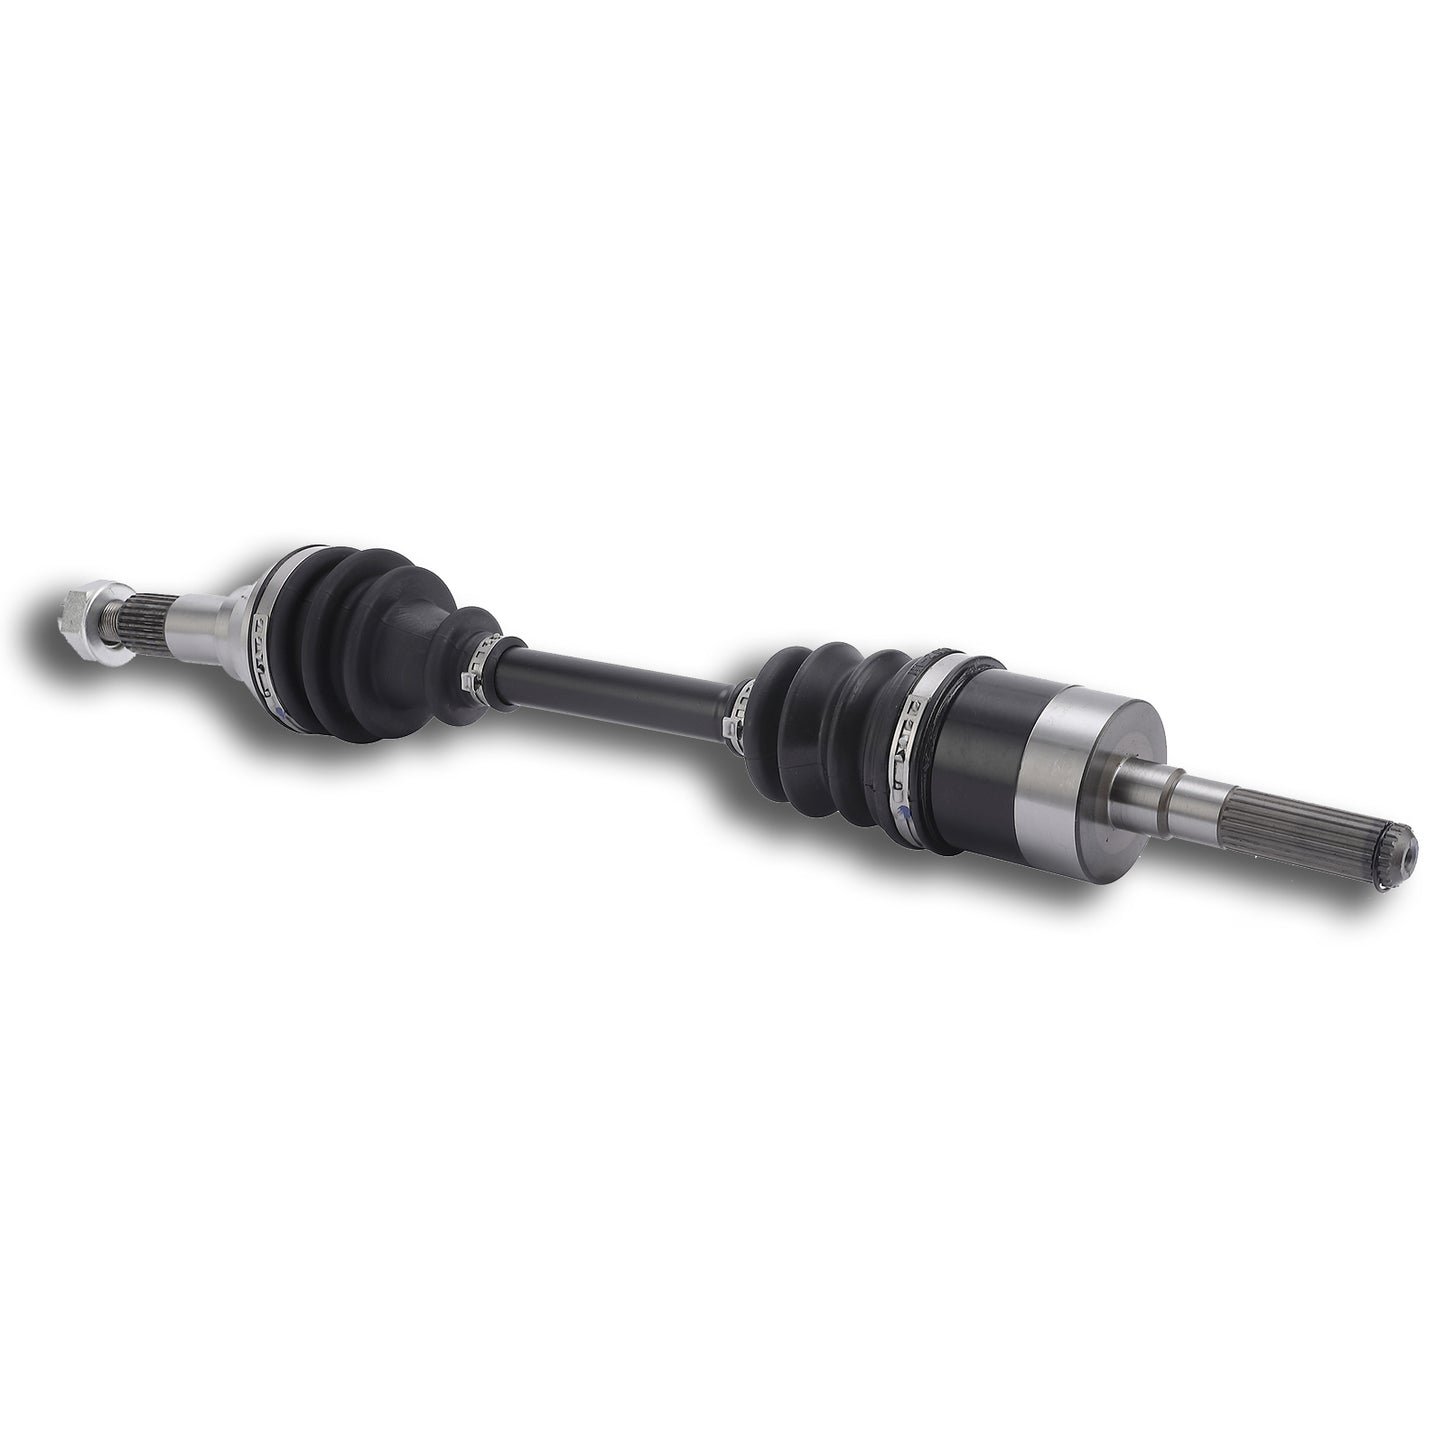 1 CAM-CA231 and 1 CAM-CA-232 Front Right Drive Shaft CV Axle Compatible with CAN AM (2019-2020) Renegade 570, 850, 1000 RF/Outlander 650, 850, 1000 RF 705402236 705402238